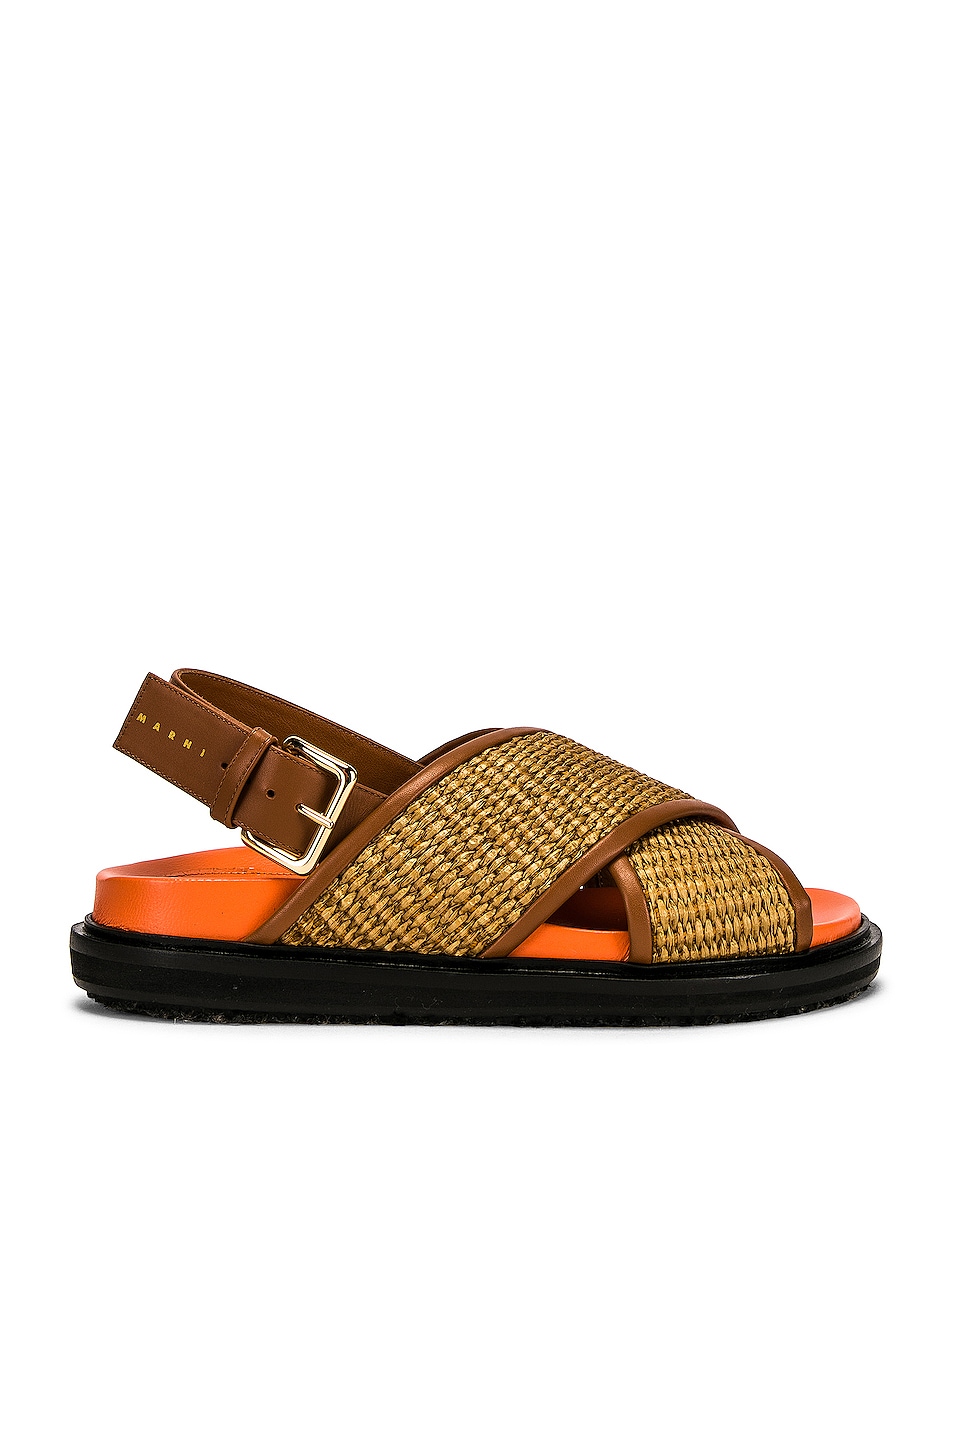 Image 1 of Marni Fussbett Sandals in Siena & Dust Apricot